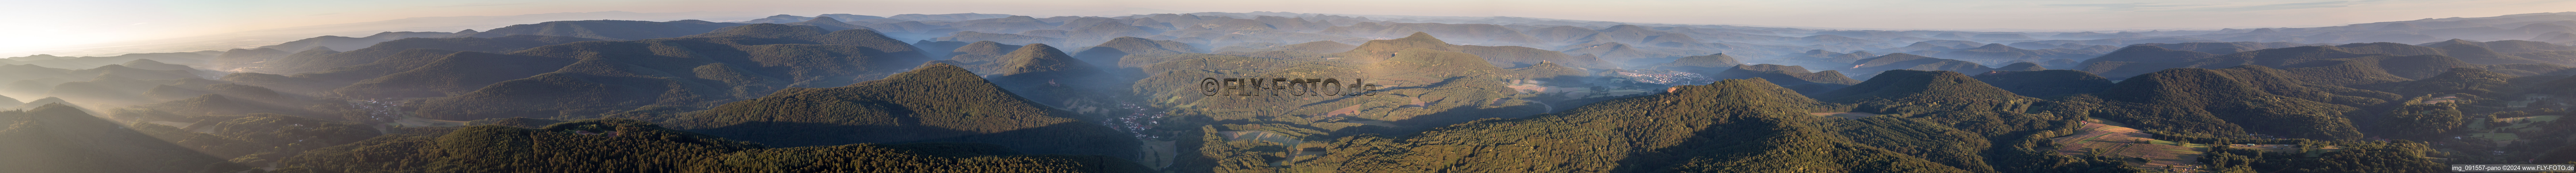 Panoramic perspective Mountain scenery of Palatinat forest in Vorderweidenthal in the state Rhineland-Palatinate, Germany